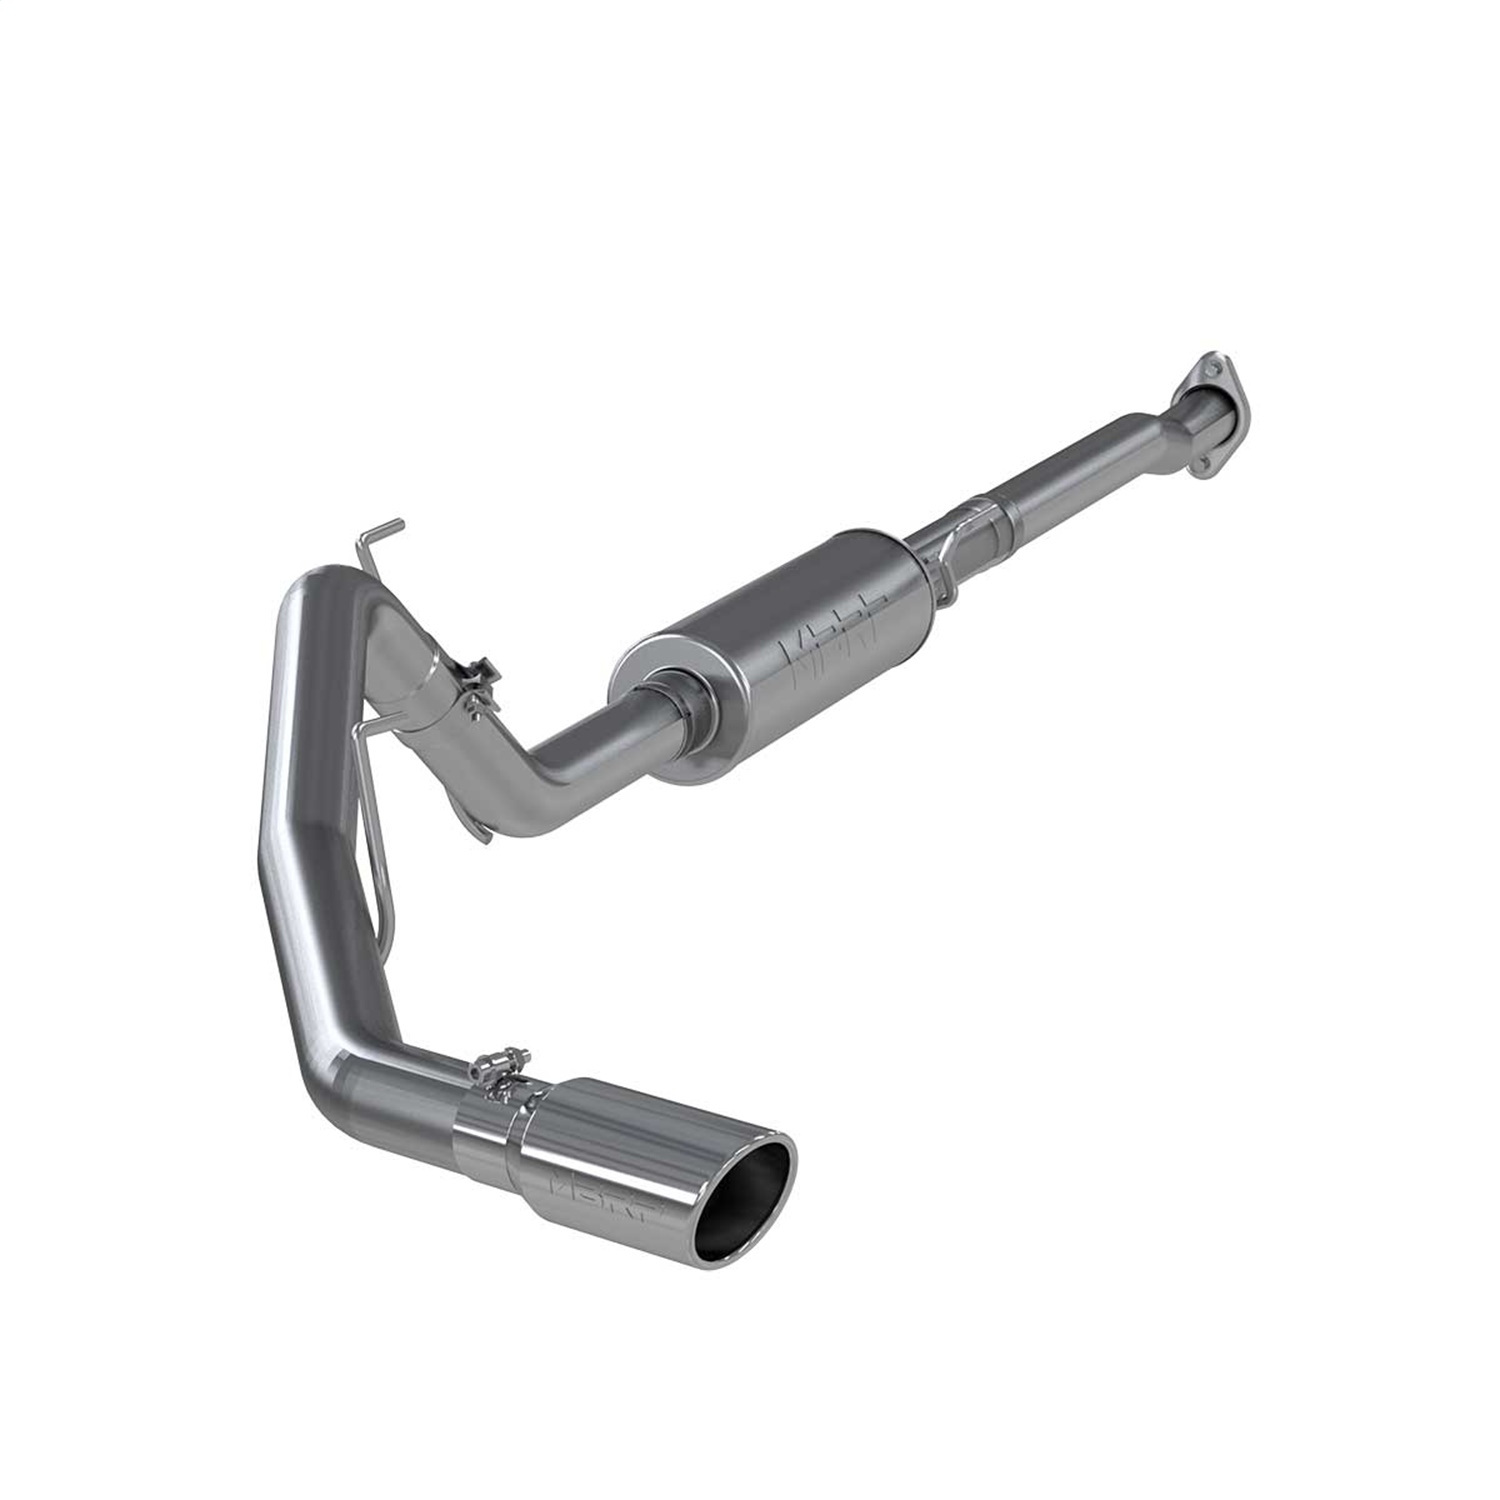 MBRP Exhaust S5210409 Armor Plus Cat Back Exhaust System Fits 09-10 F-150